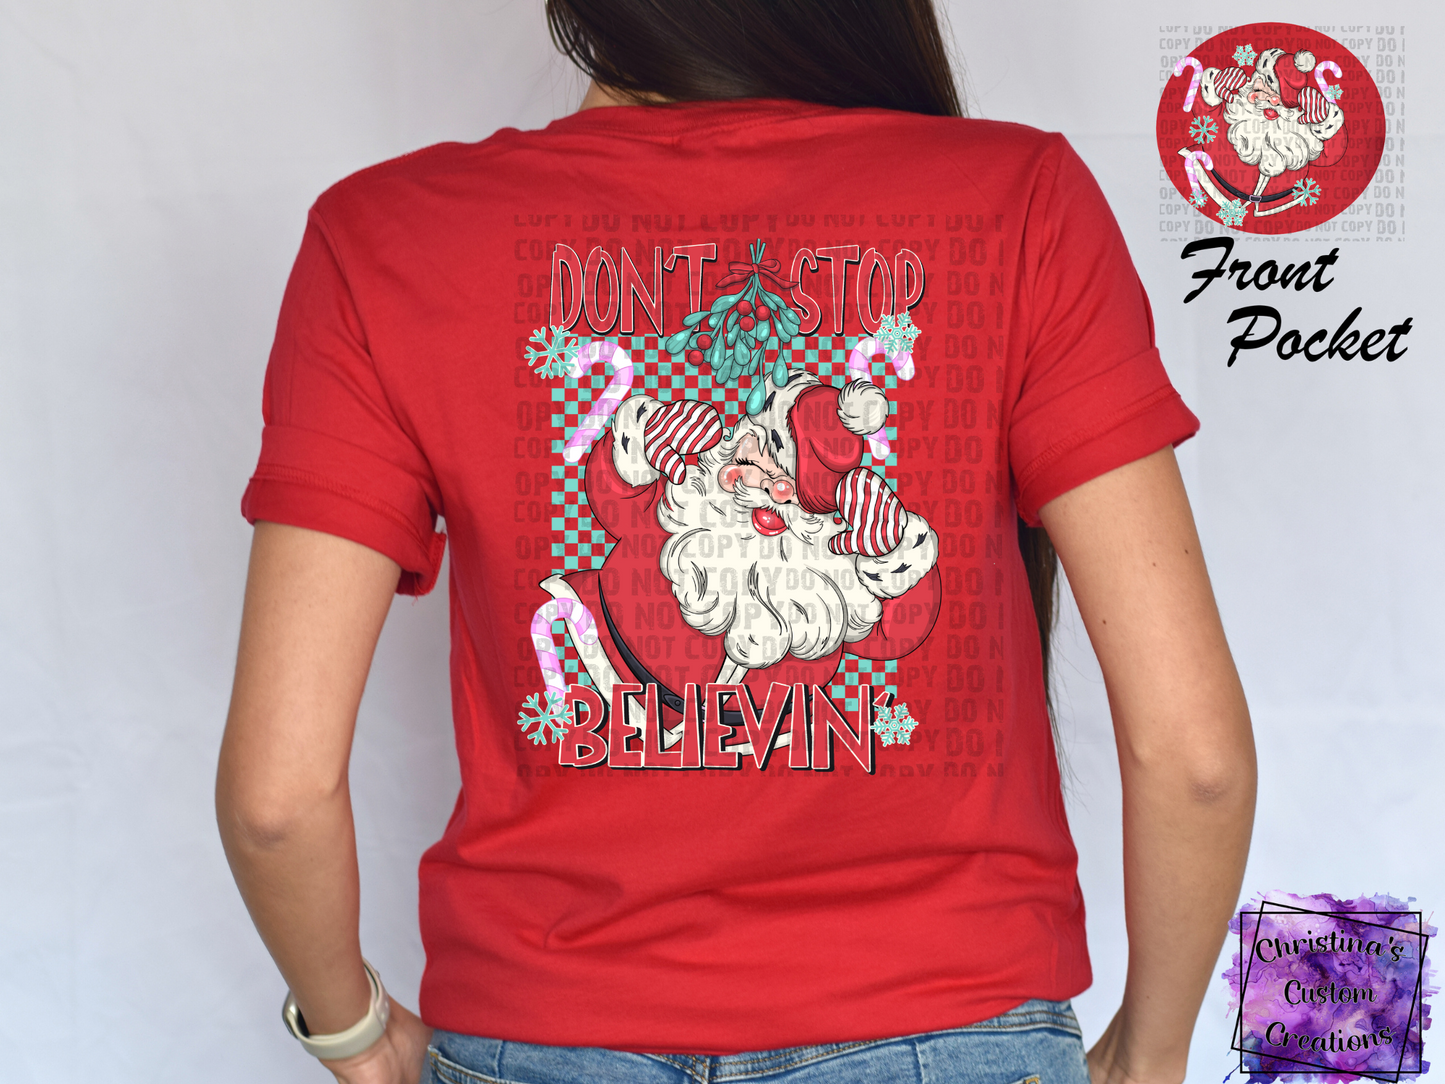 Don't Stop Believin' T-Shirt | Cute Christmas Shirt | Front and Back Shirt | Fast Shipping | Super Soft Shirts for Women/Kid's